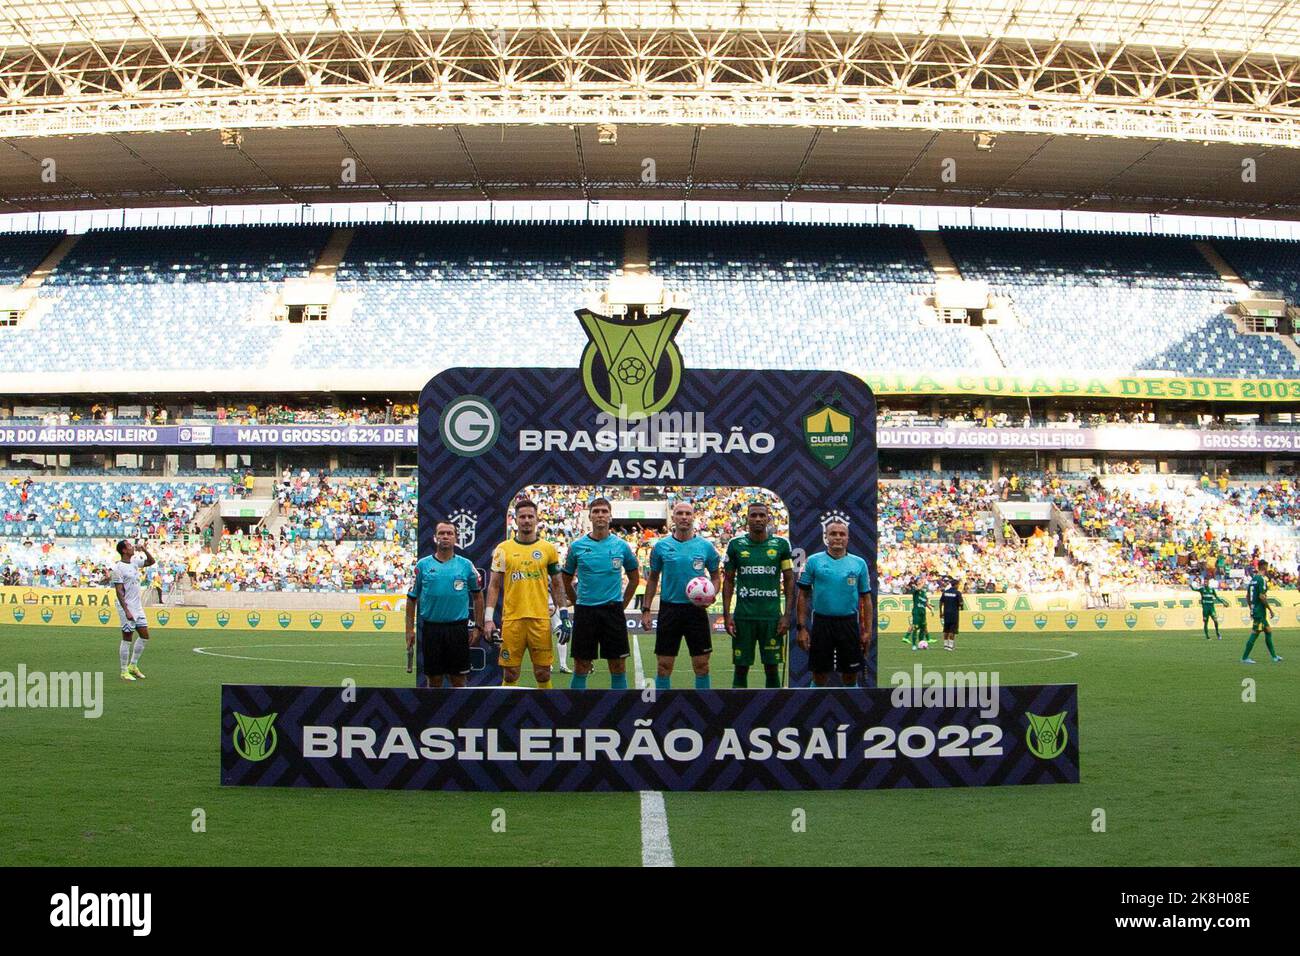 Cuiaba, Brazil. 23rd Oct, 2022. MT - Cuiaba - 10/23/2022 - BRAZILIAN A 2022, CUIABA X GOIAS - Players from Cuiaba and Goias pose for photos next to the referee before the match at the Arena Pantanal stadium for the Brazilian championship A 2022. Photo: Gil Gomes/AGIF/Sipa USA Credit: Sipa USA/Alamy Live News Stock Photo